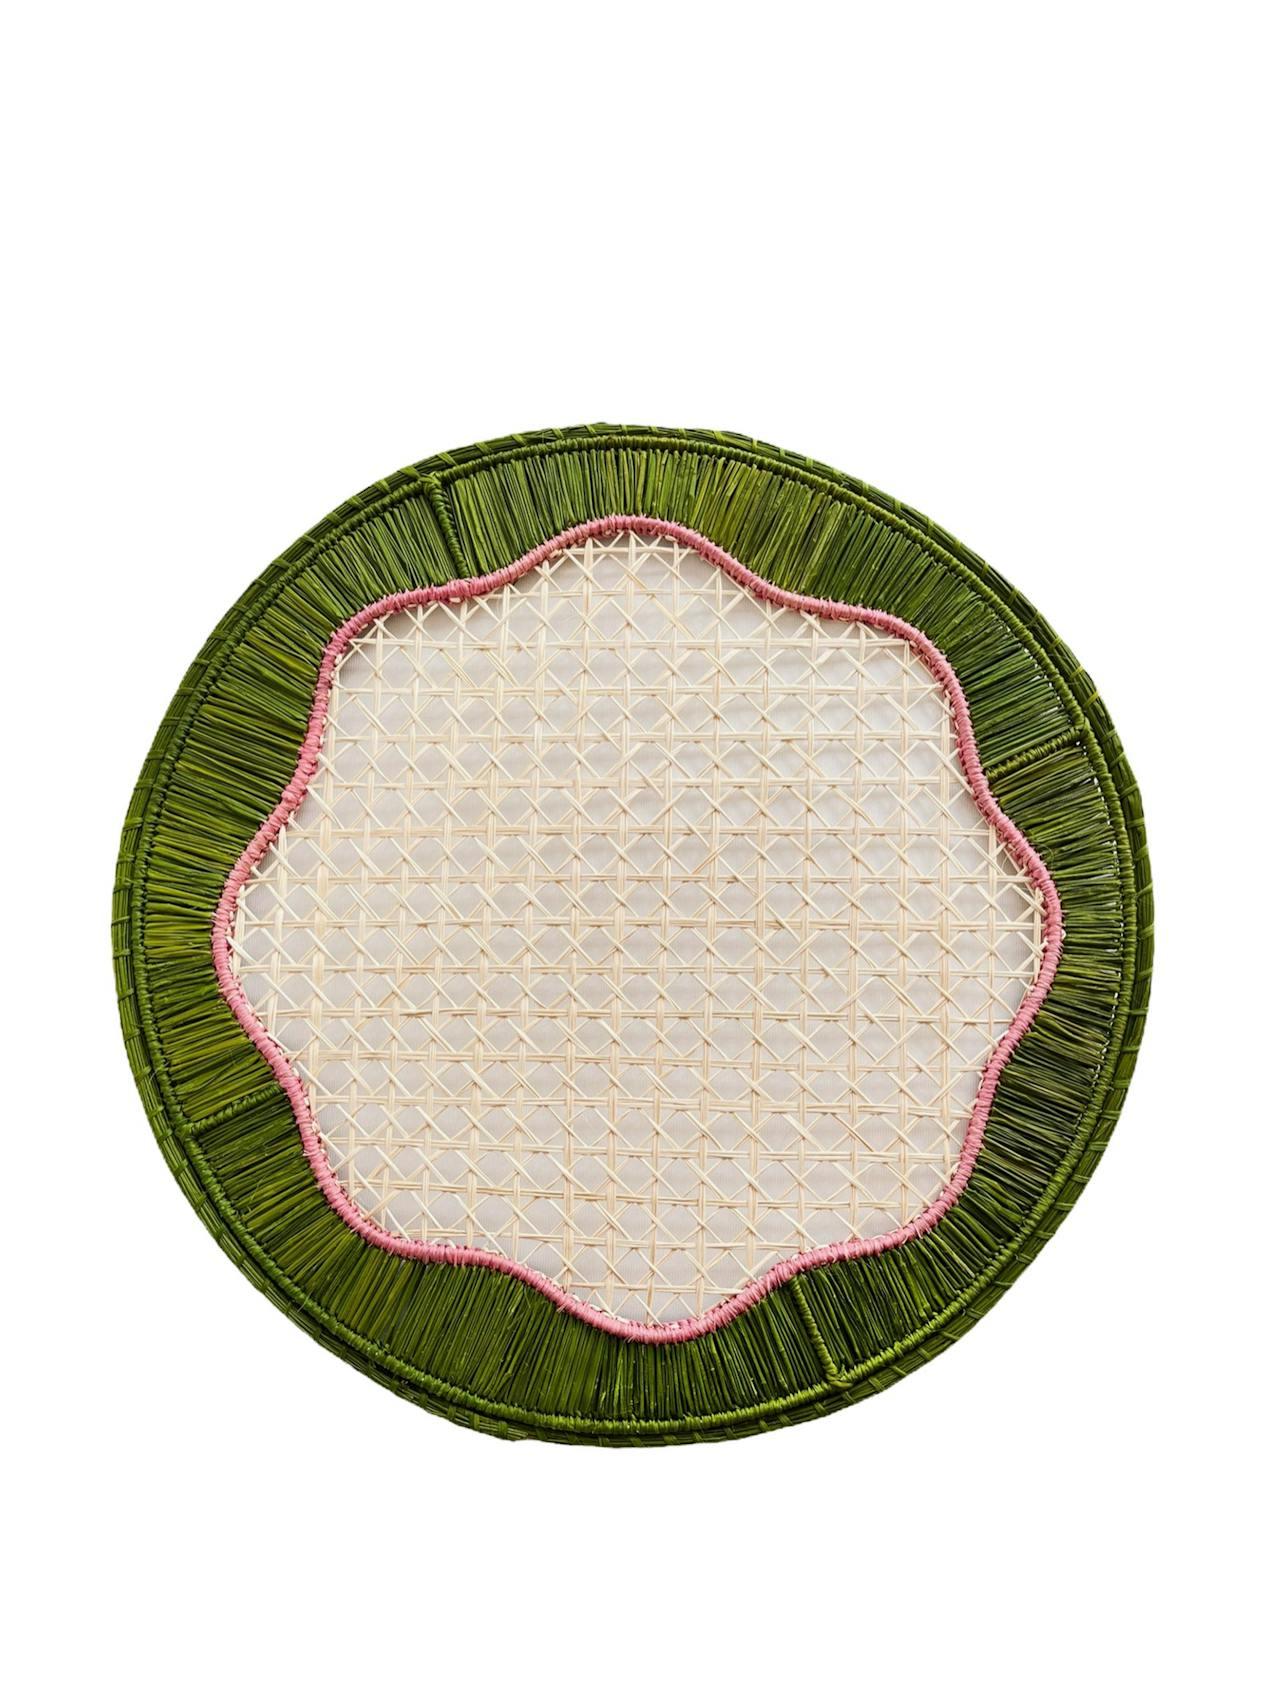 Wavy pink and green placemat with thick edge